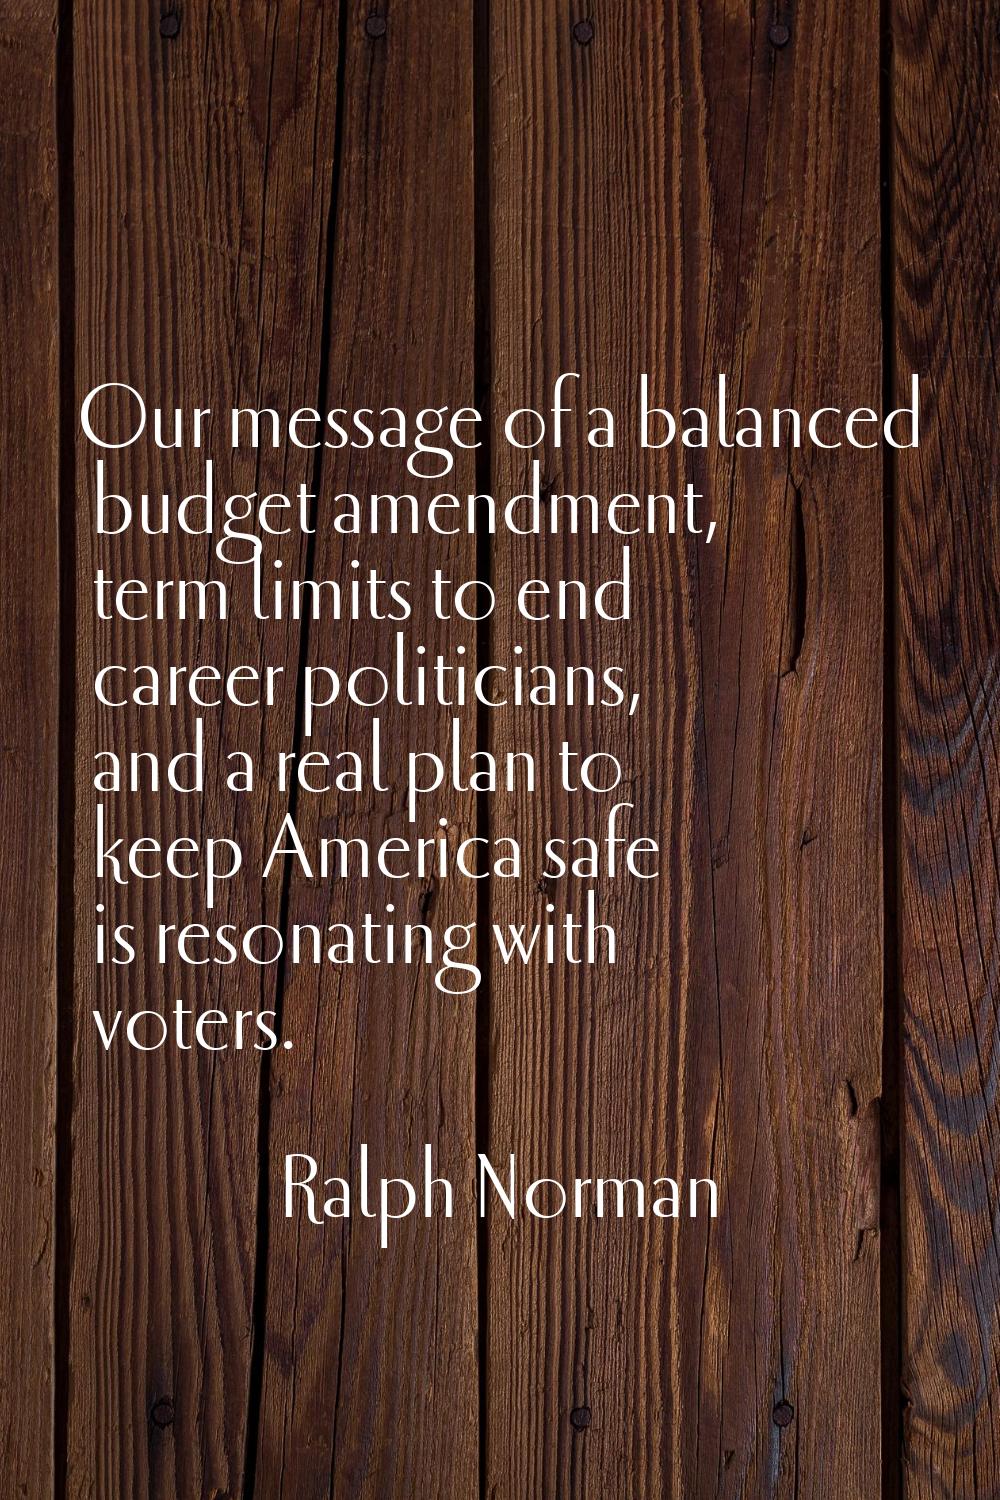 Our message of a balanced budget amendment, term limits to end career politicians, and a real plan 